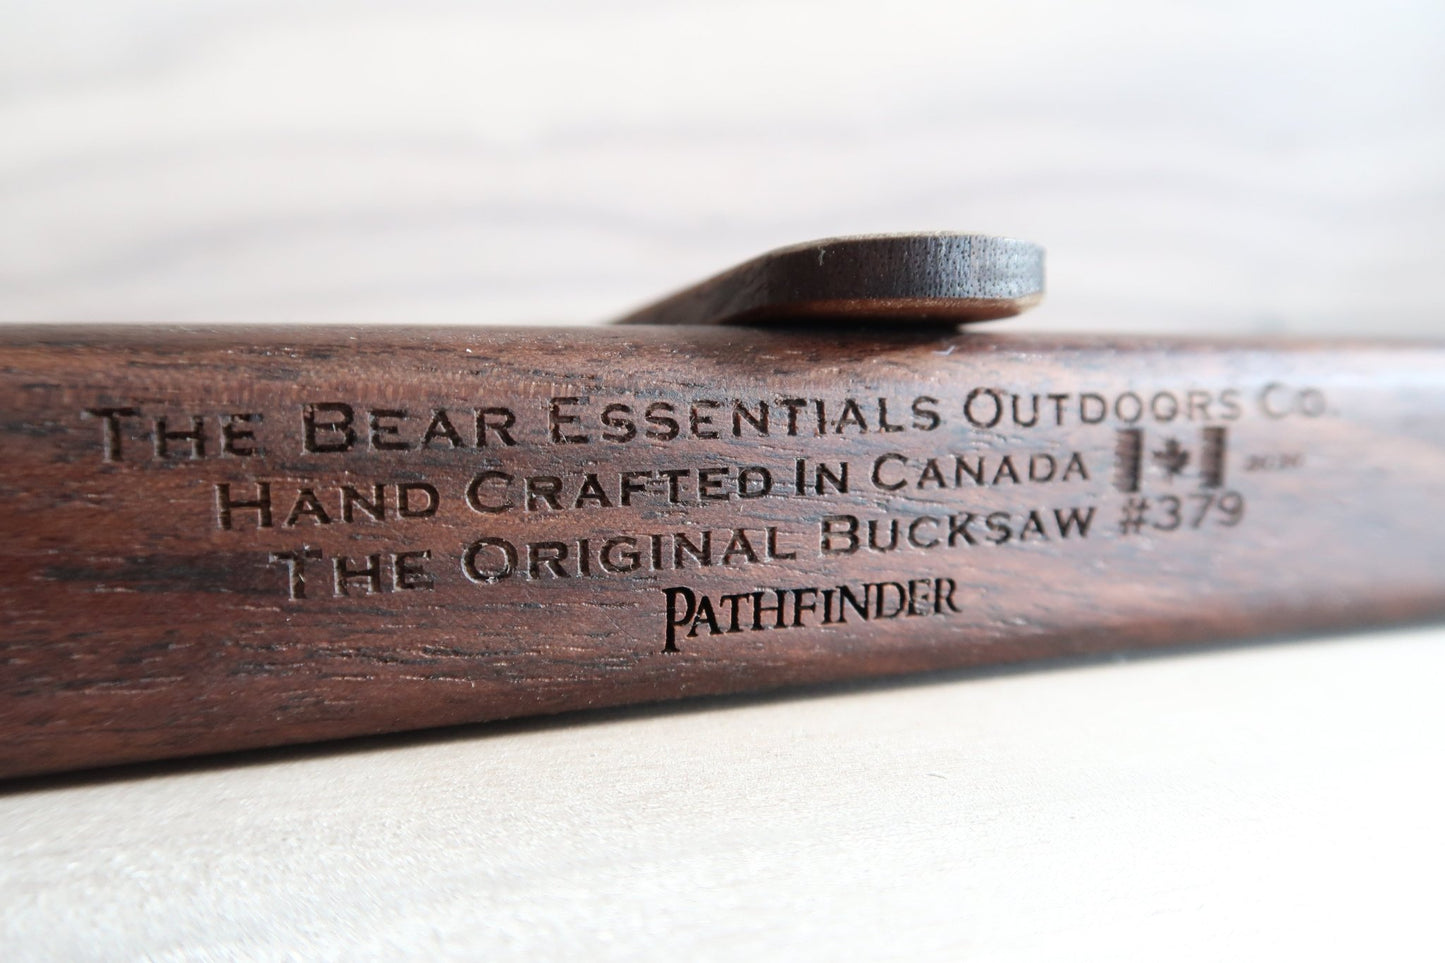 The Original Bucksaw - The Bear Essentials Outdoors Co., Bucksaw Only, Add Custom Engraved Family Name [+$25],